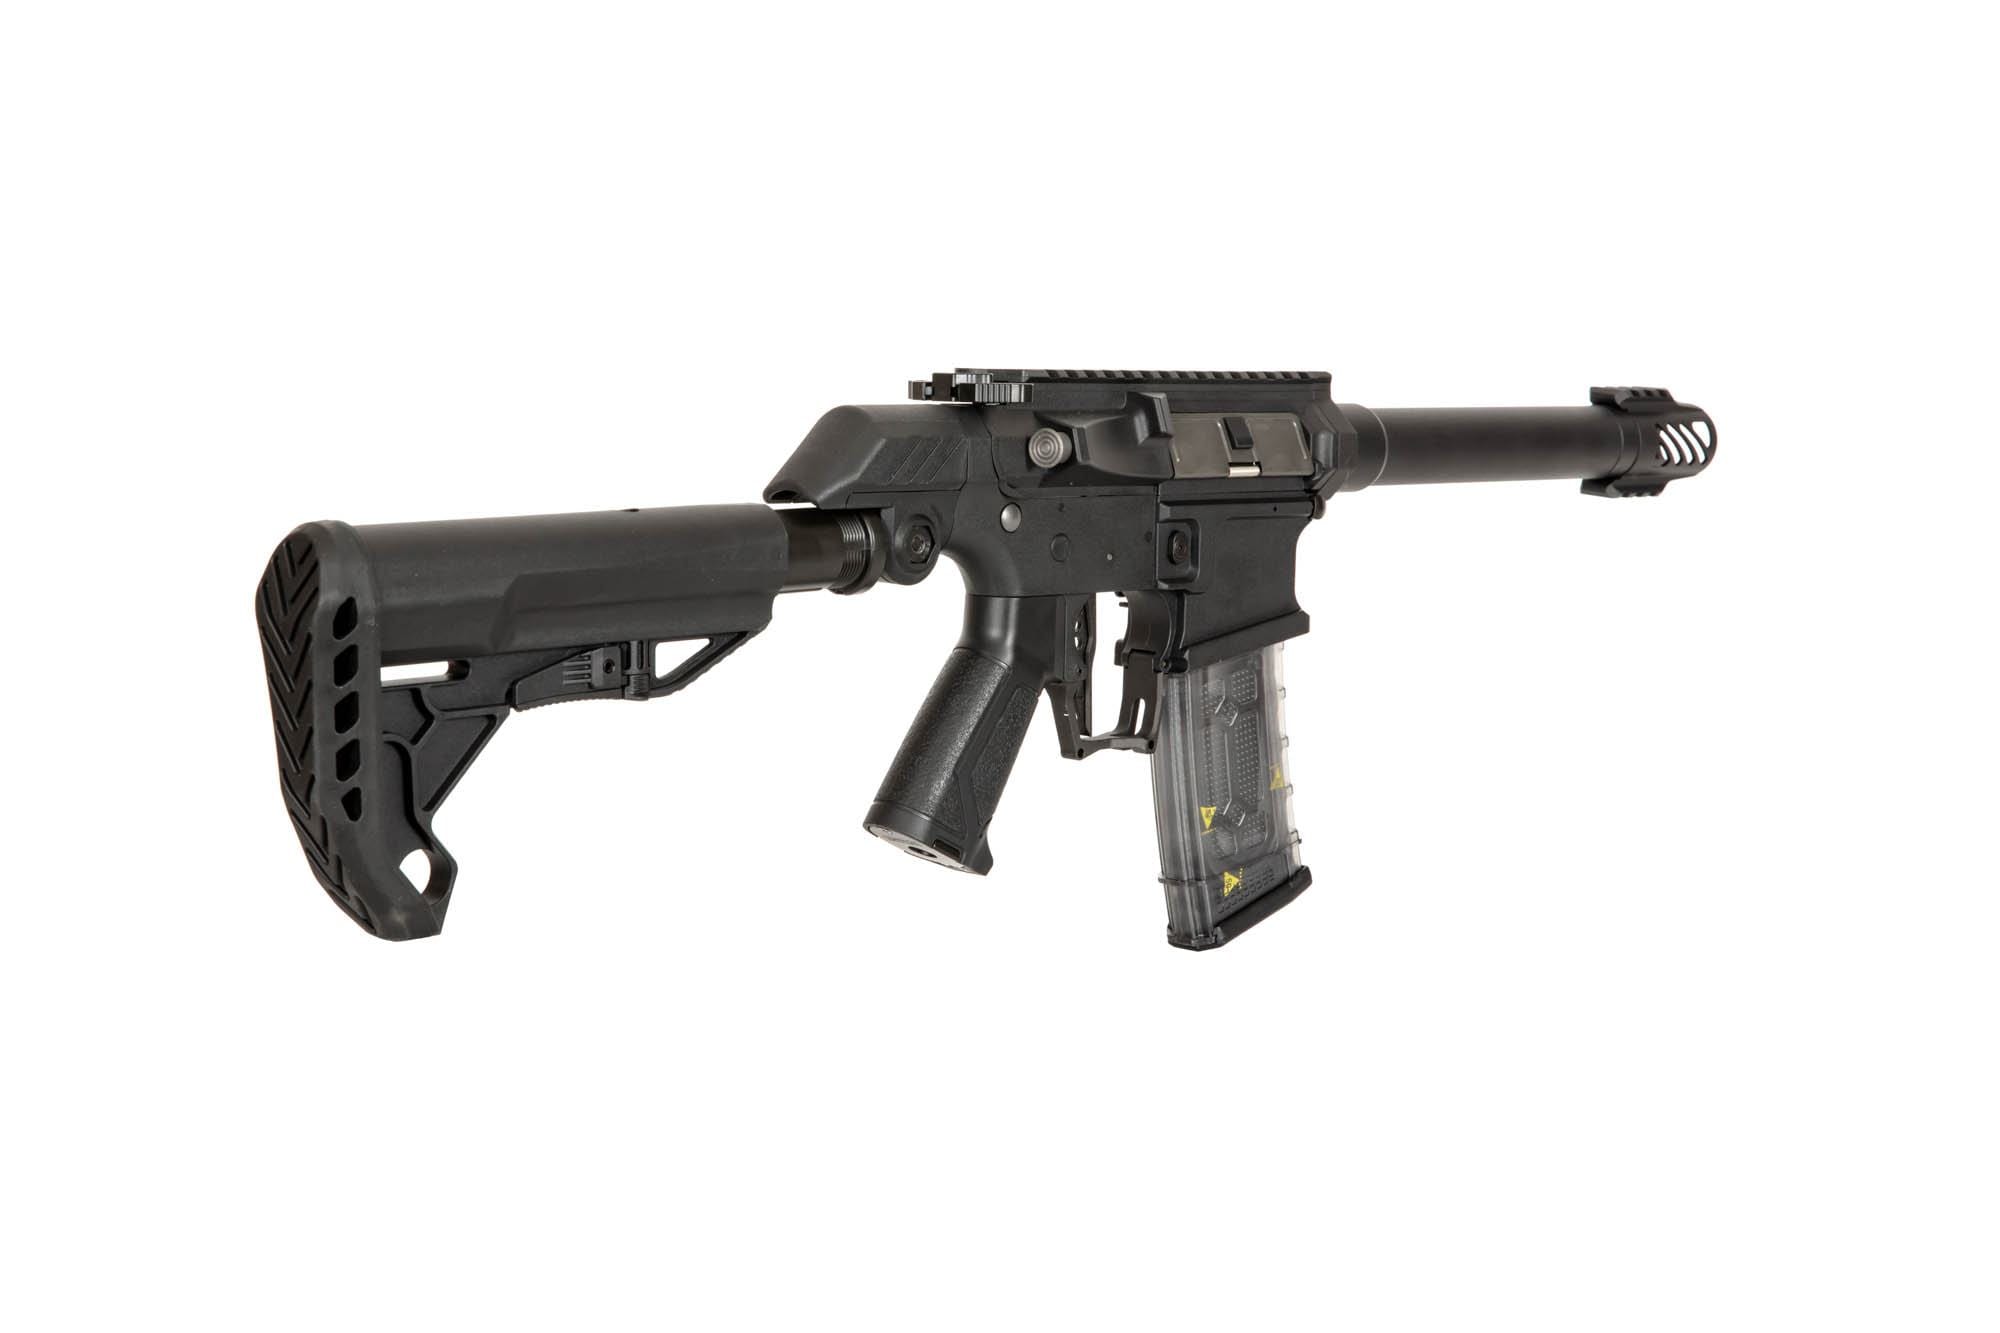 SSG-1 Speedsoft Rifle by G&G on Airsoft Mania Europe